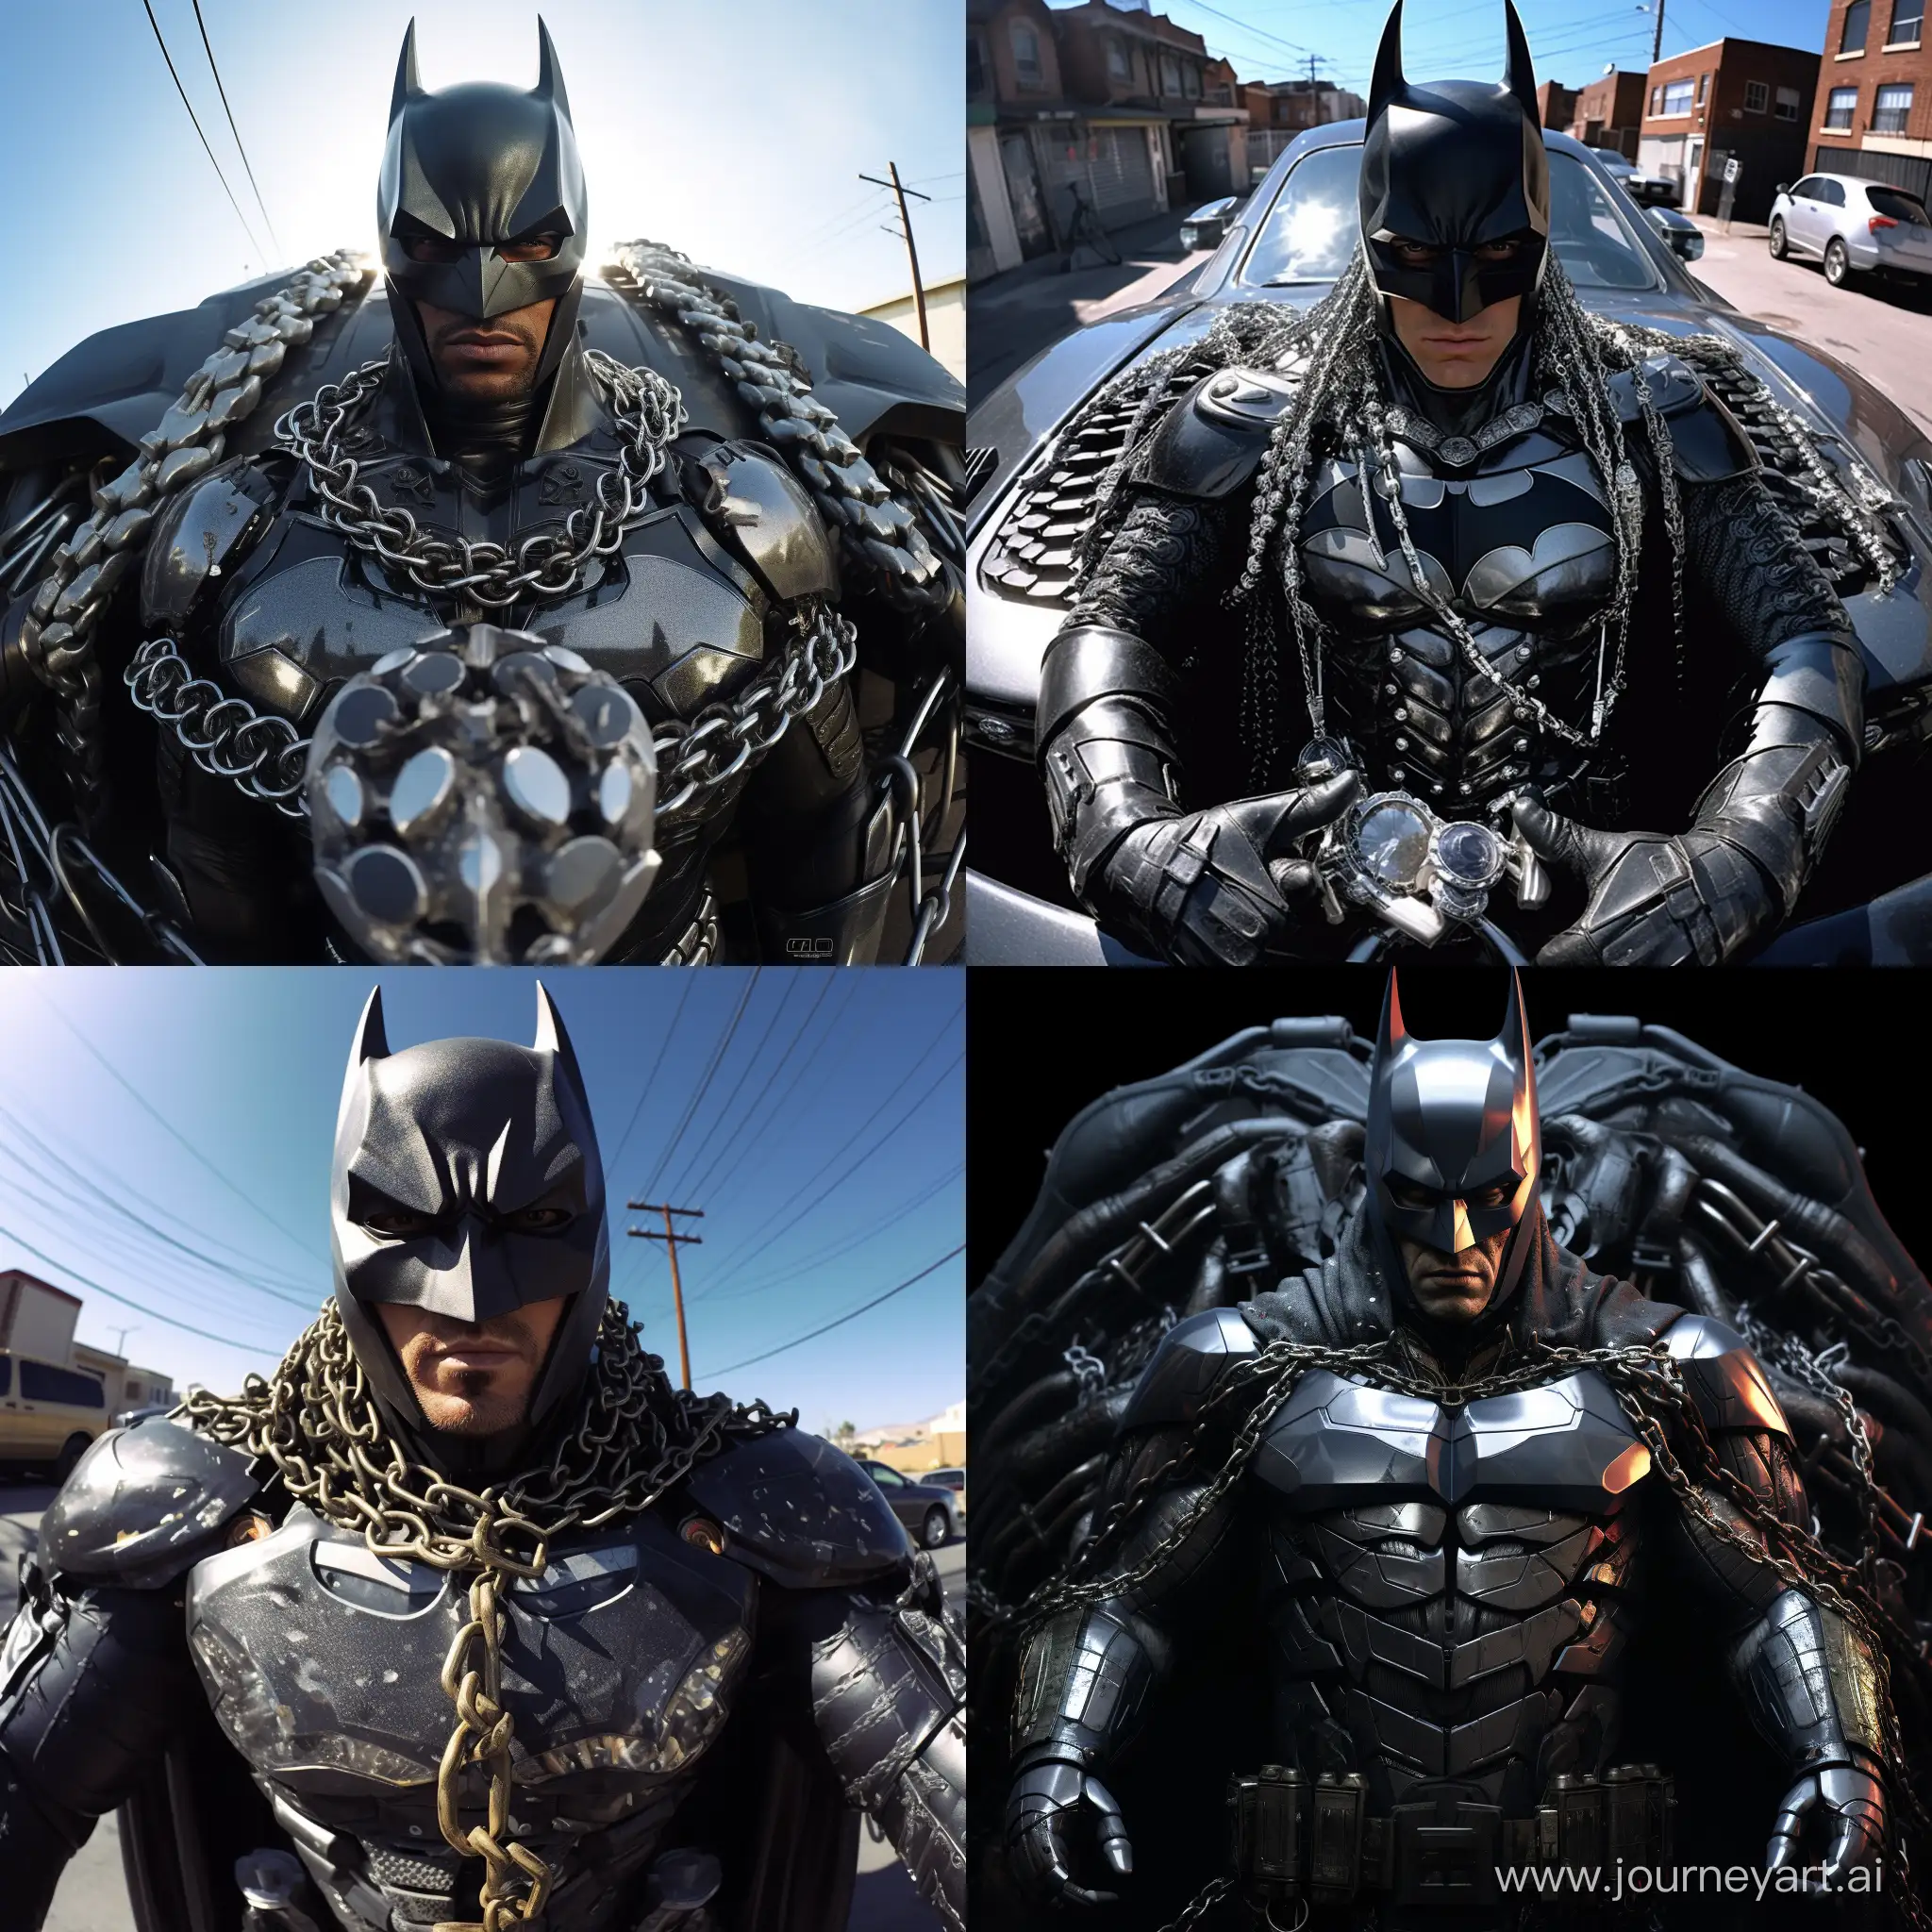 Hyper realistic Batman wearing iced out grills and chains, standing in front of his batmobile looking out of the fisheye perspective